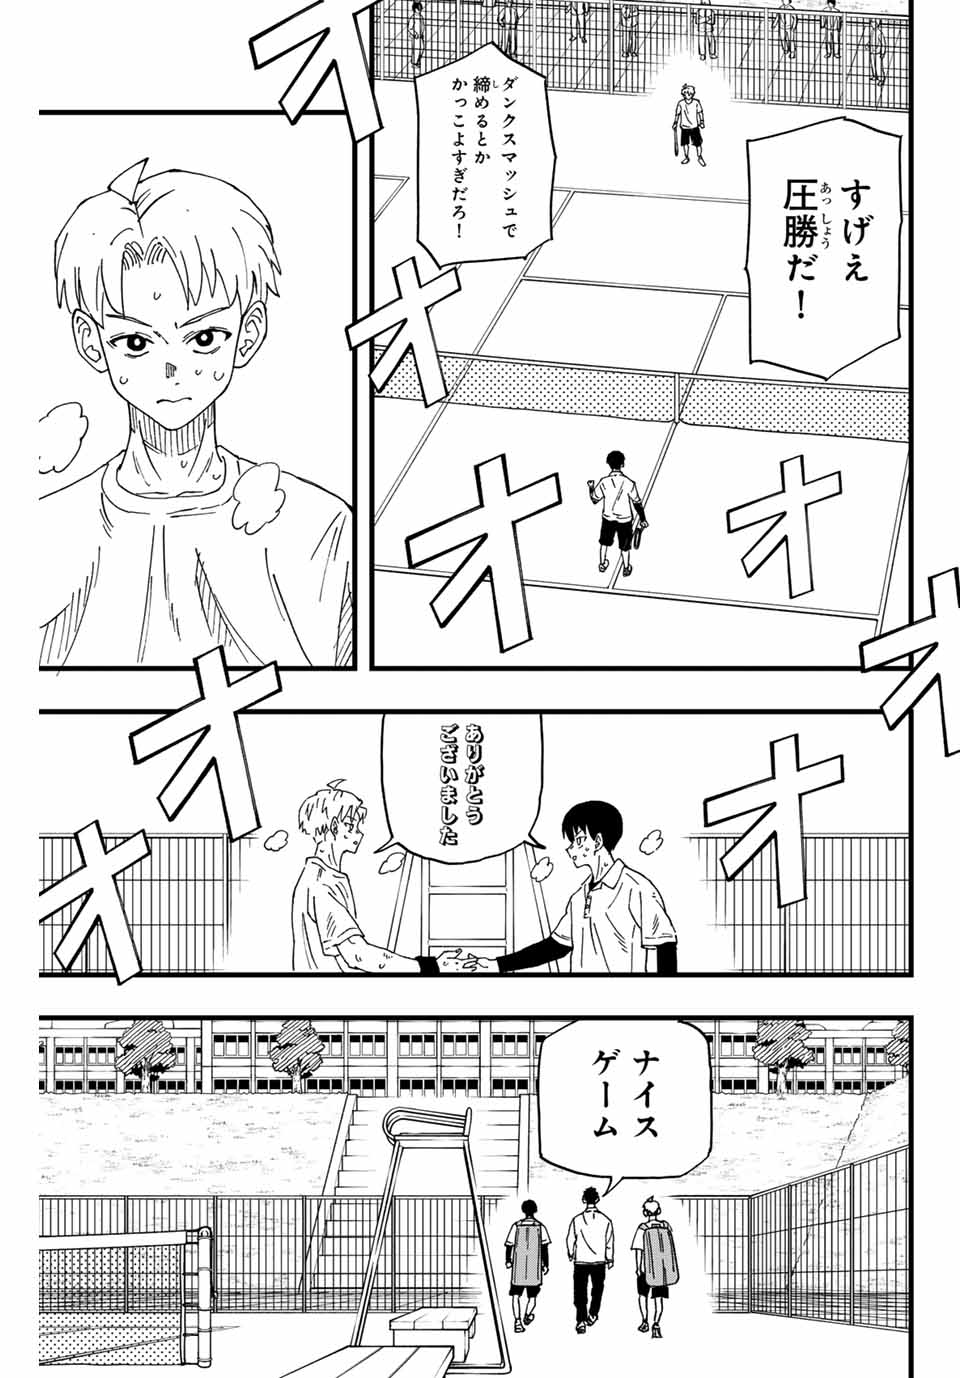 LoVE GAME 第1.2話 - Page 25